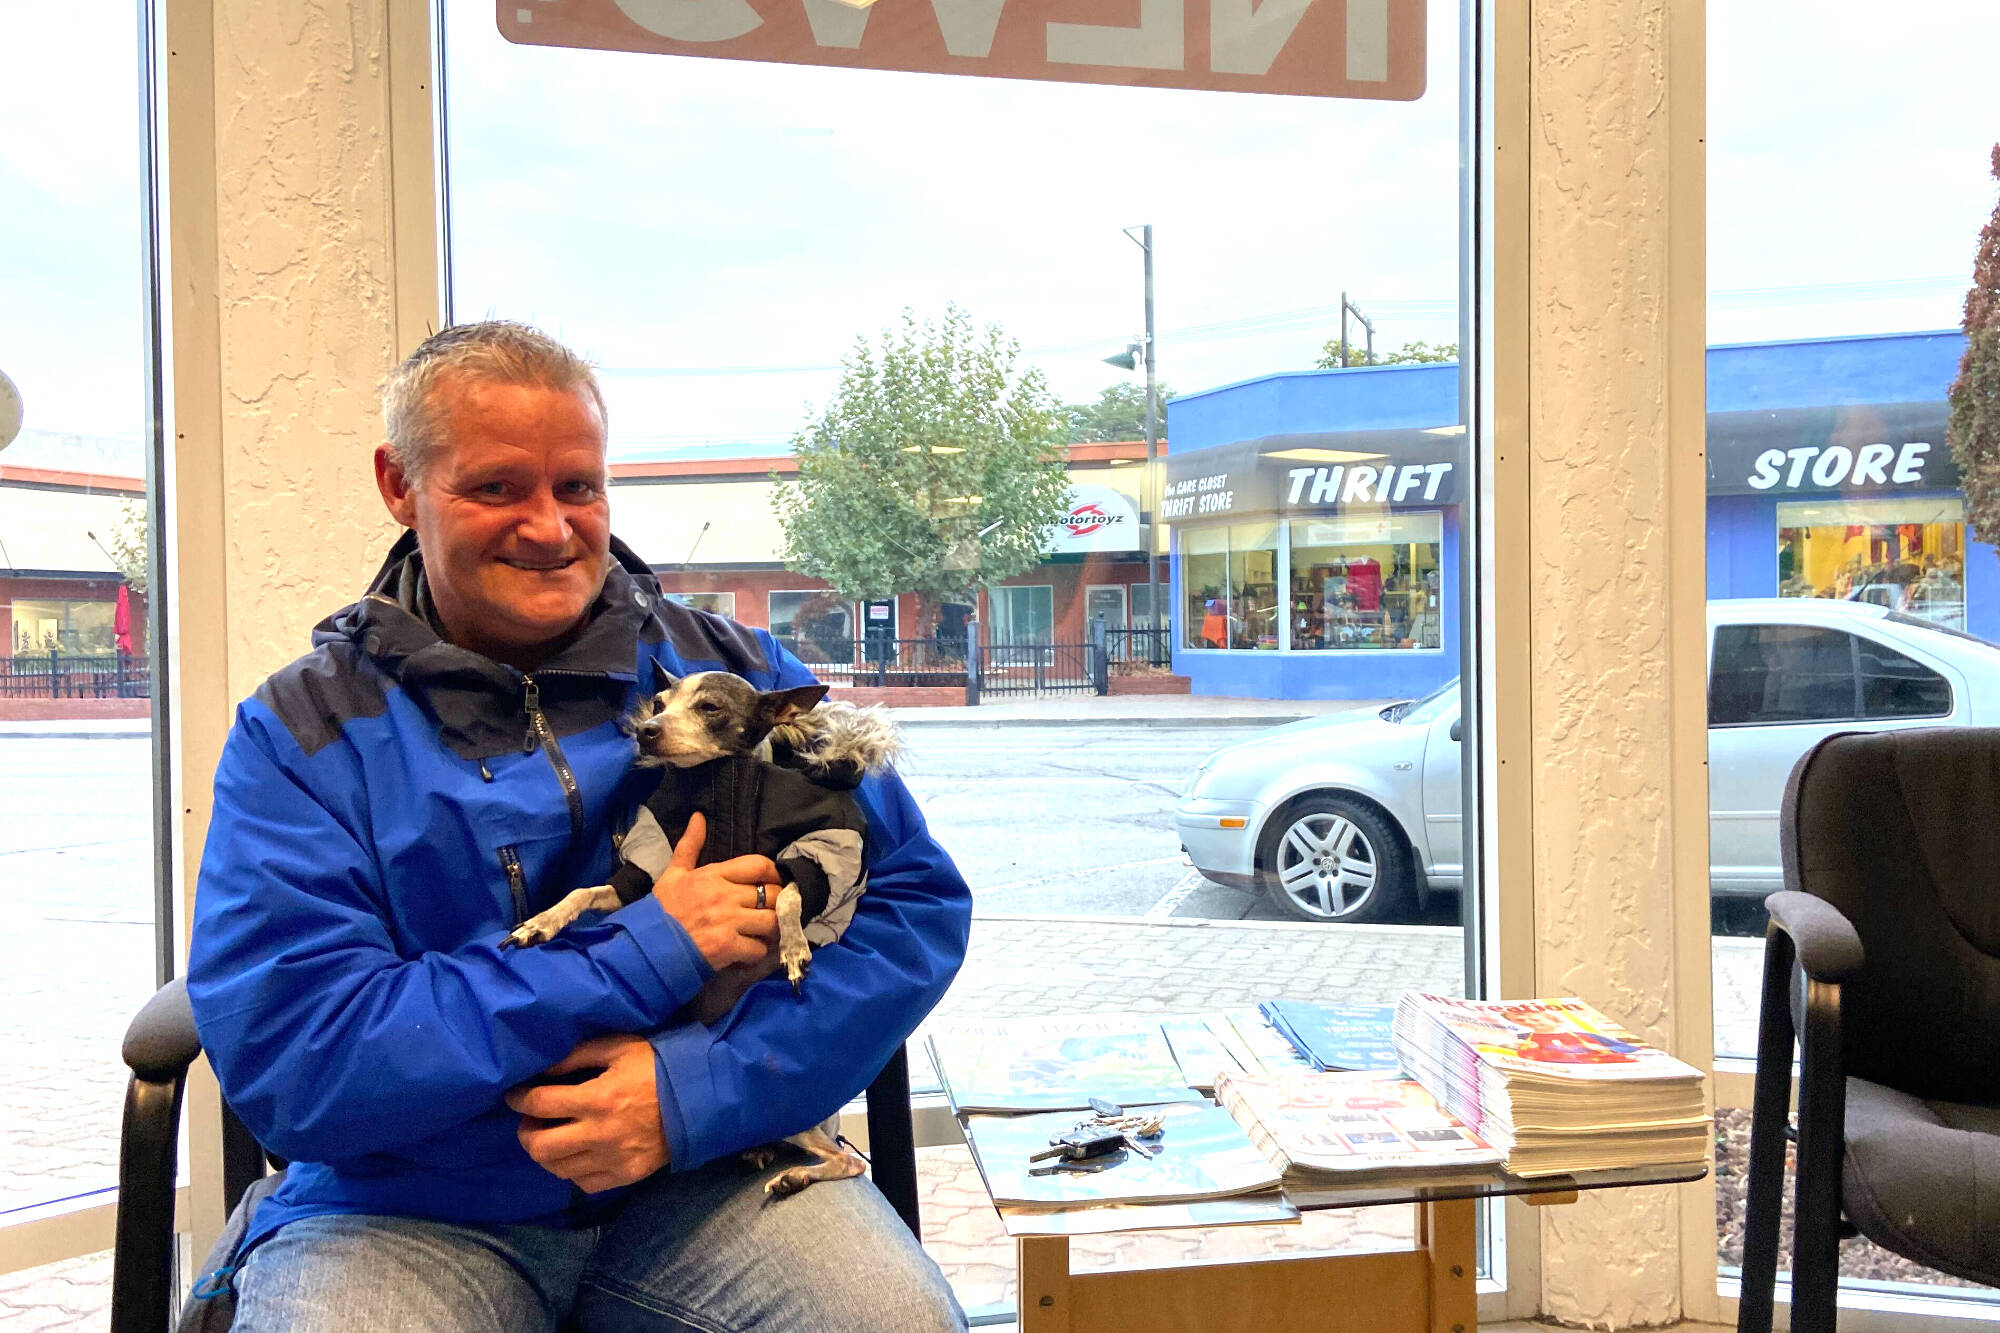 Local hero Gord Portman with his dog Zippy stopped by the Penticton Western News office on Wednesday to give a health update on his dog who is slowly gaining weight again after ingesting cocaine and meth while doing outreach work. (Monique Tamminga Western News)